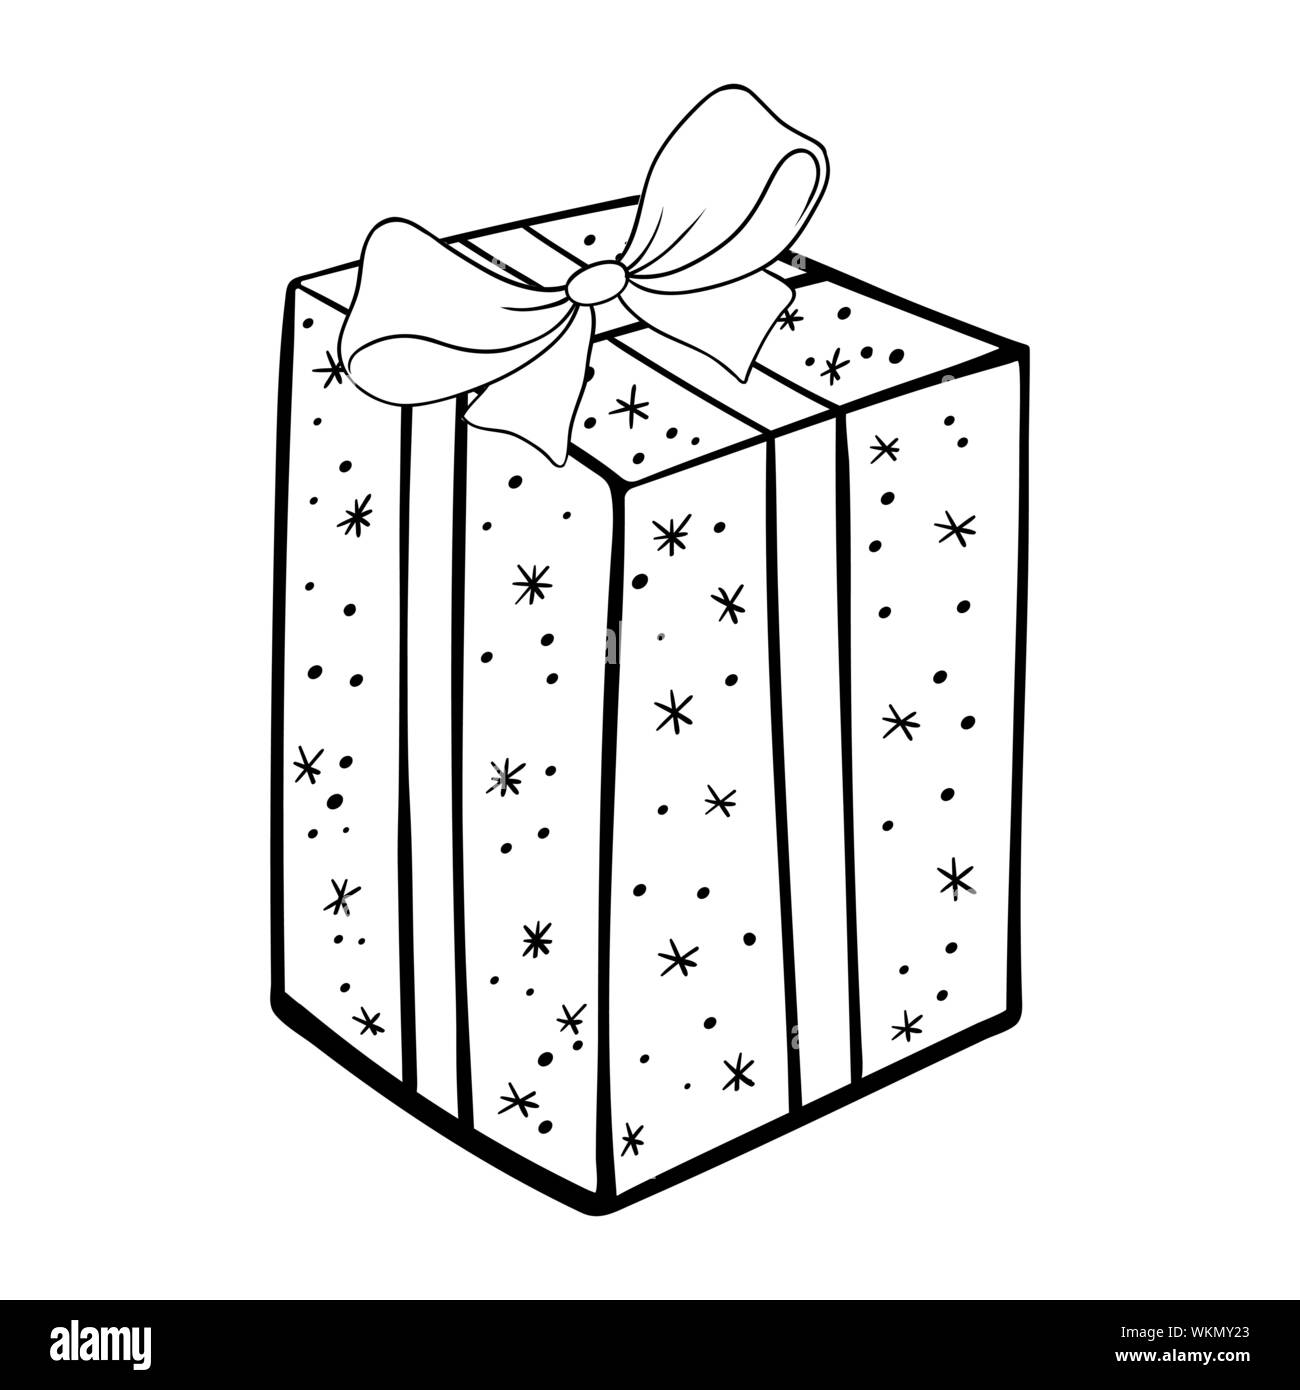 Wrapped gift present with silver wrapping paper and black ribbon vector  illustration graphic Stock Vector